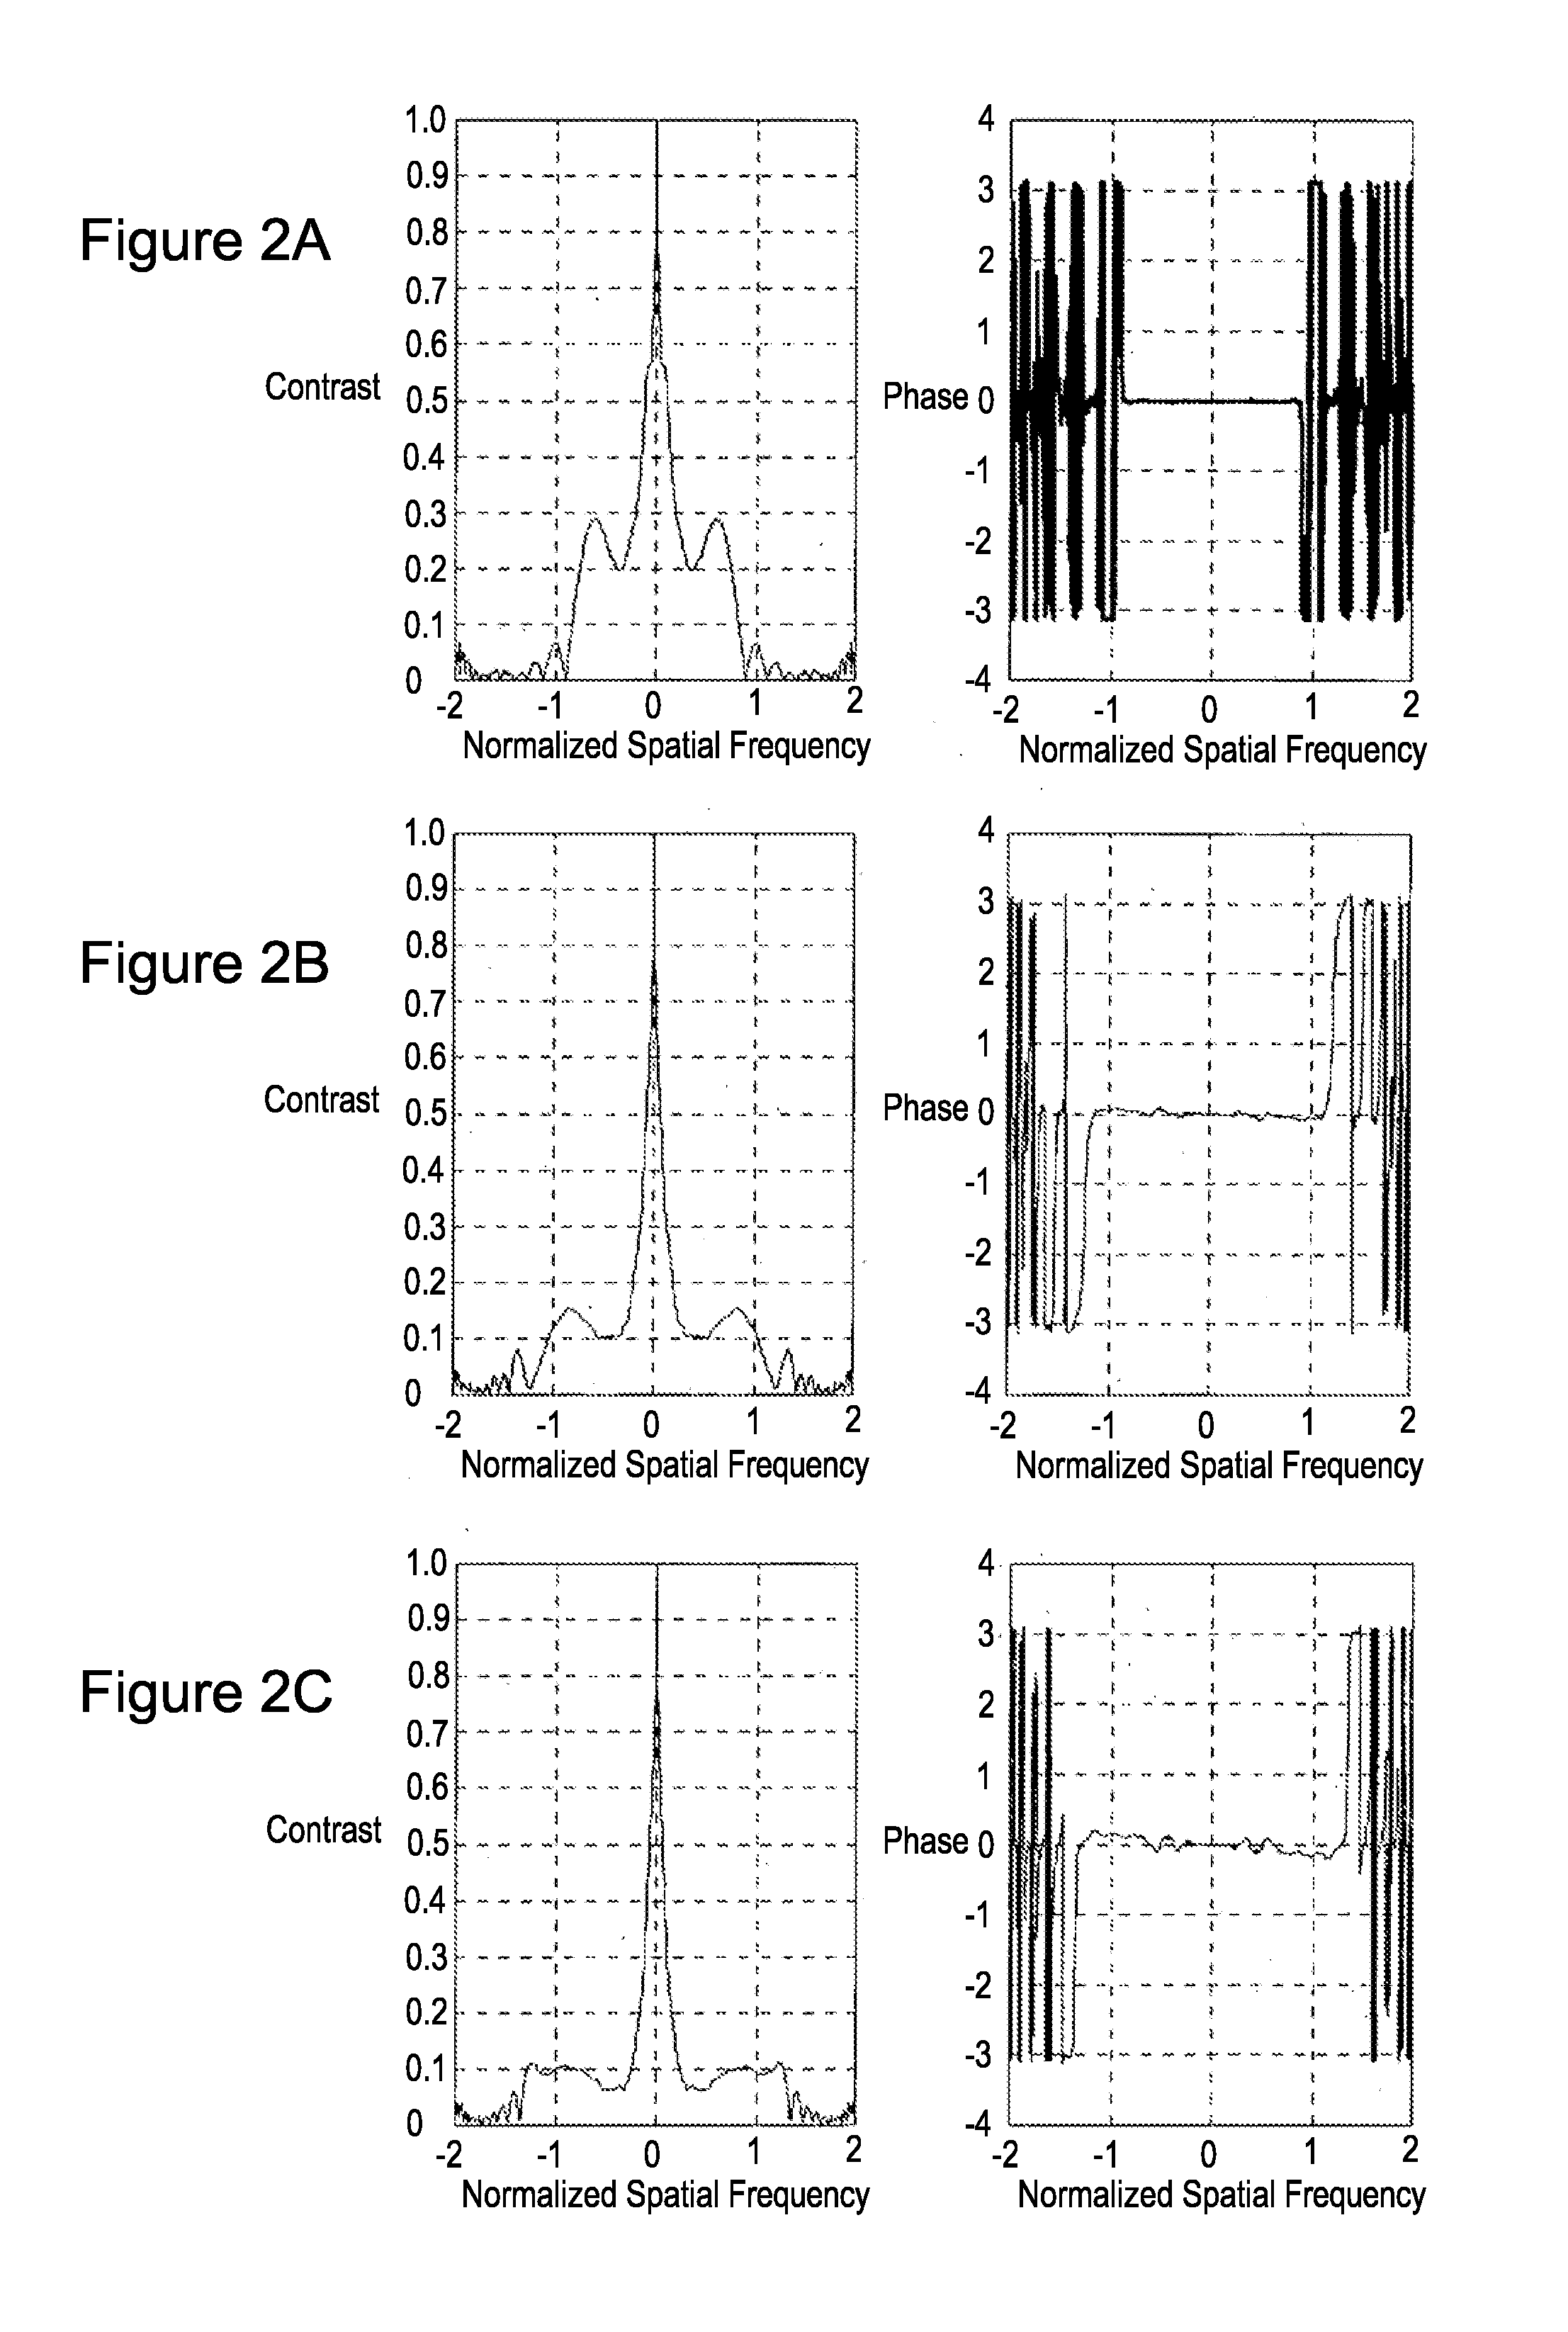 Optical mask for all-optical extended depth-of-field for imaging systems under incoherent illumination